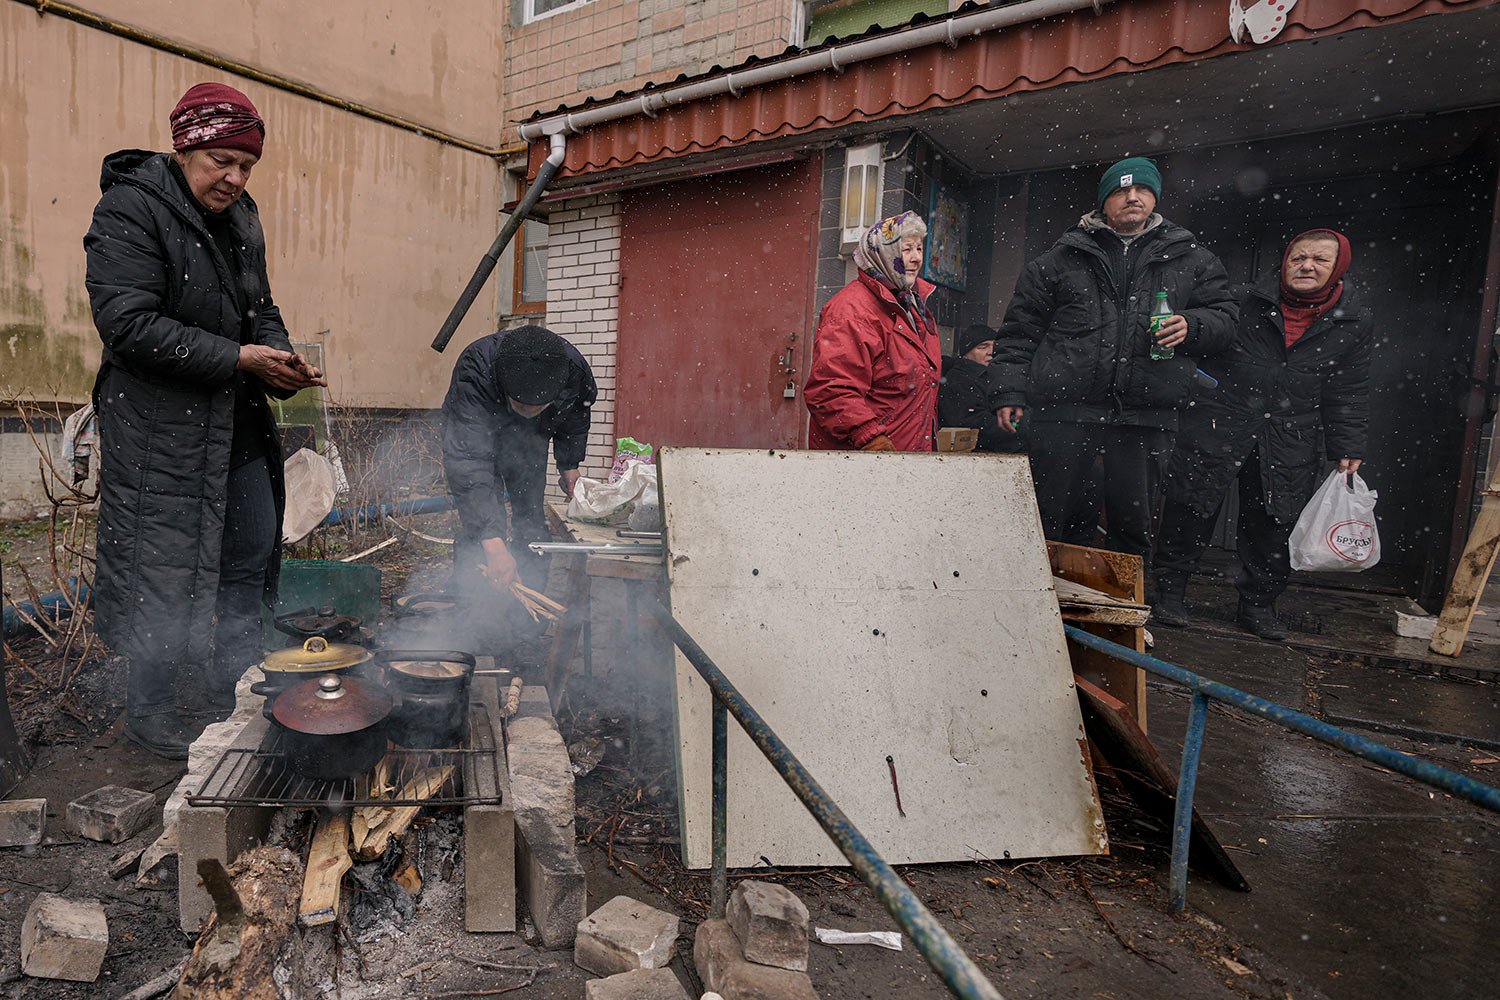  People cook on an open fire outside an apartment building which had no electricity, water or gas since the beginning of the Russian invasion in Bucha, Ukraine, Sunday, April 3, 2022. (AP Photo/Vadim Ghirda) 